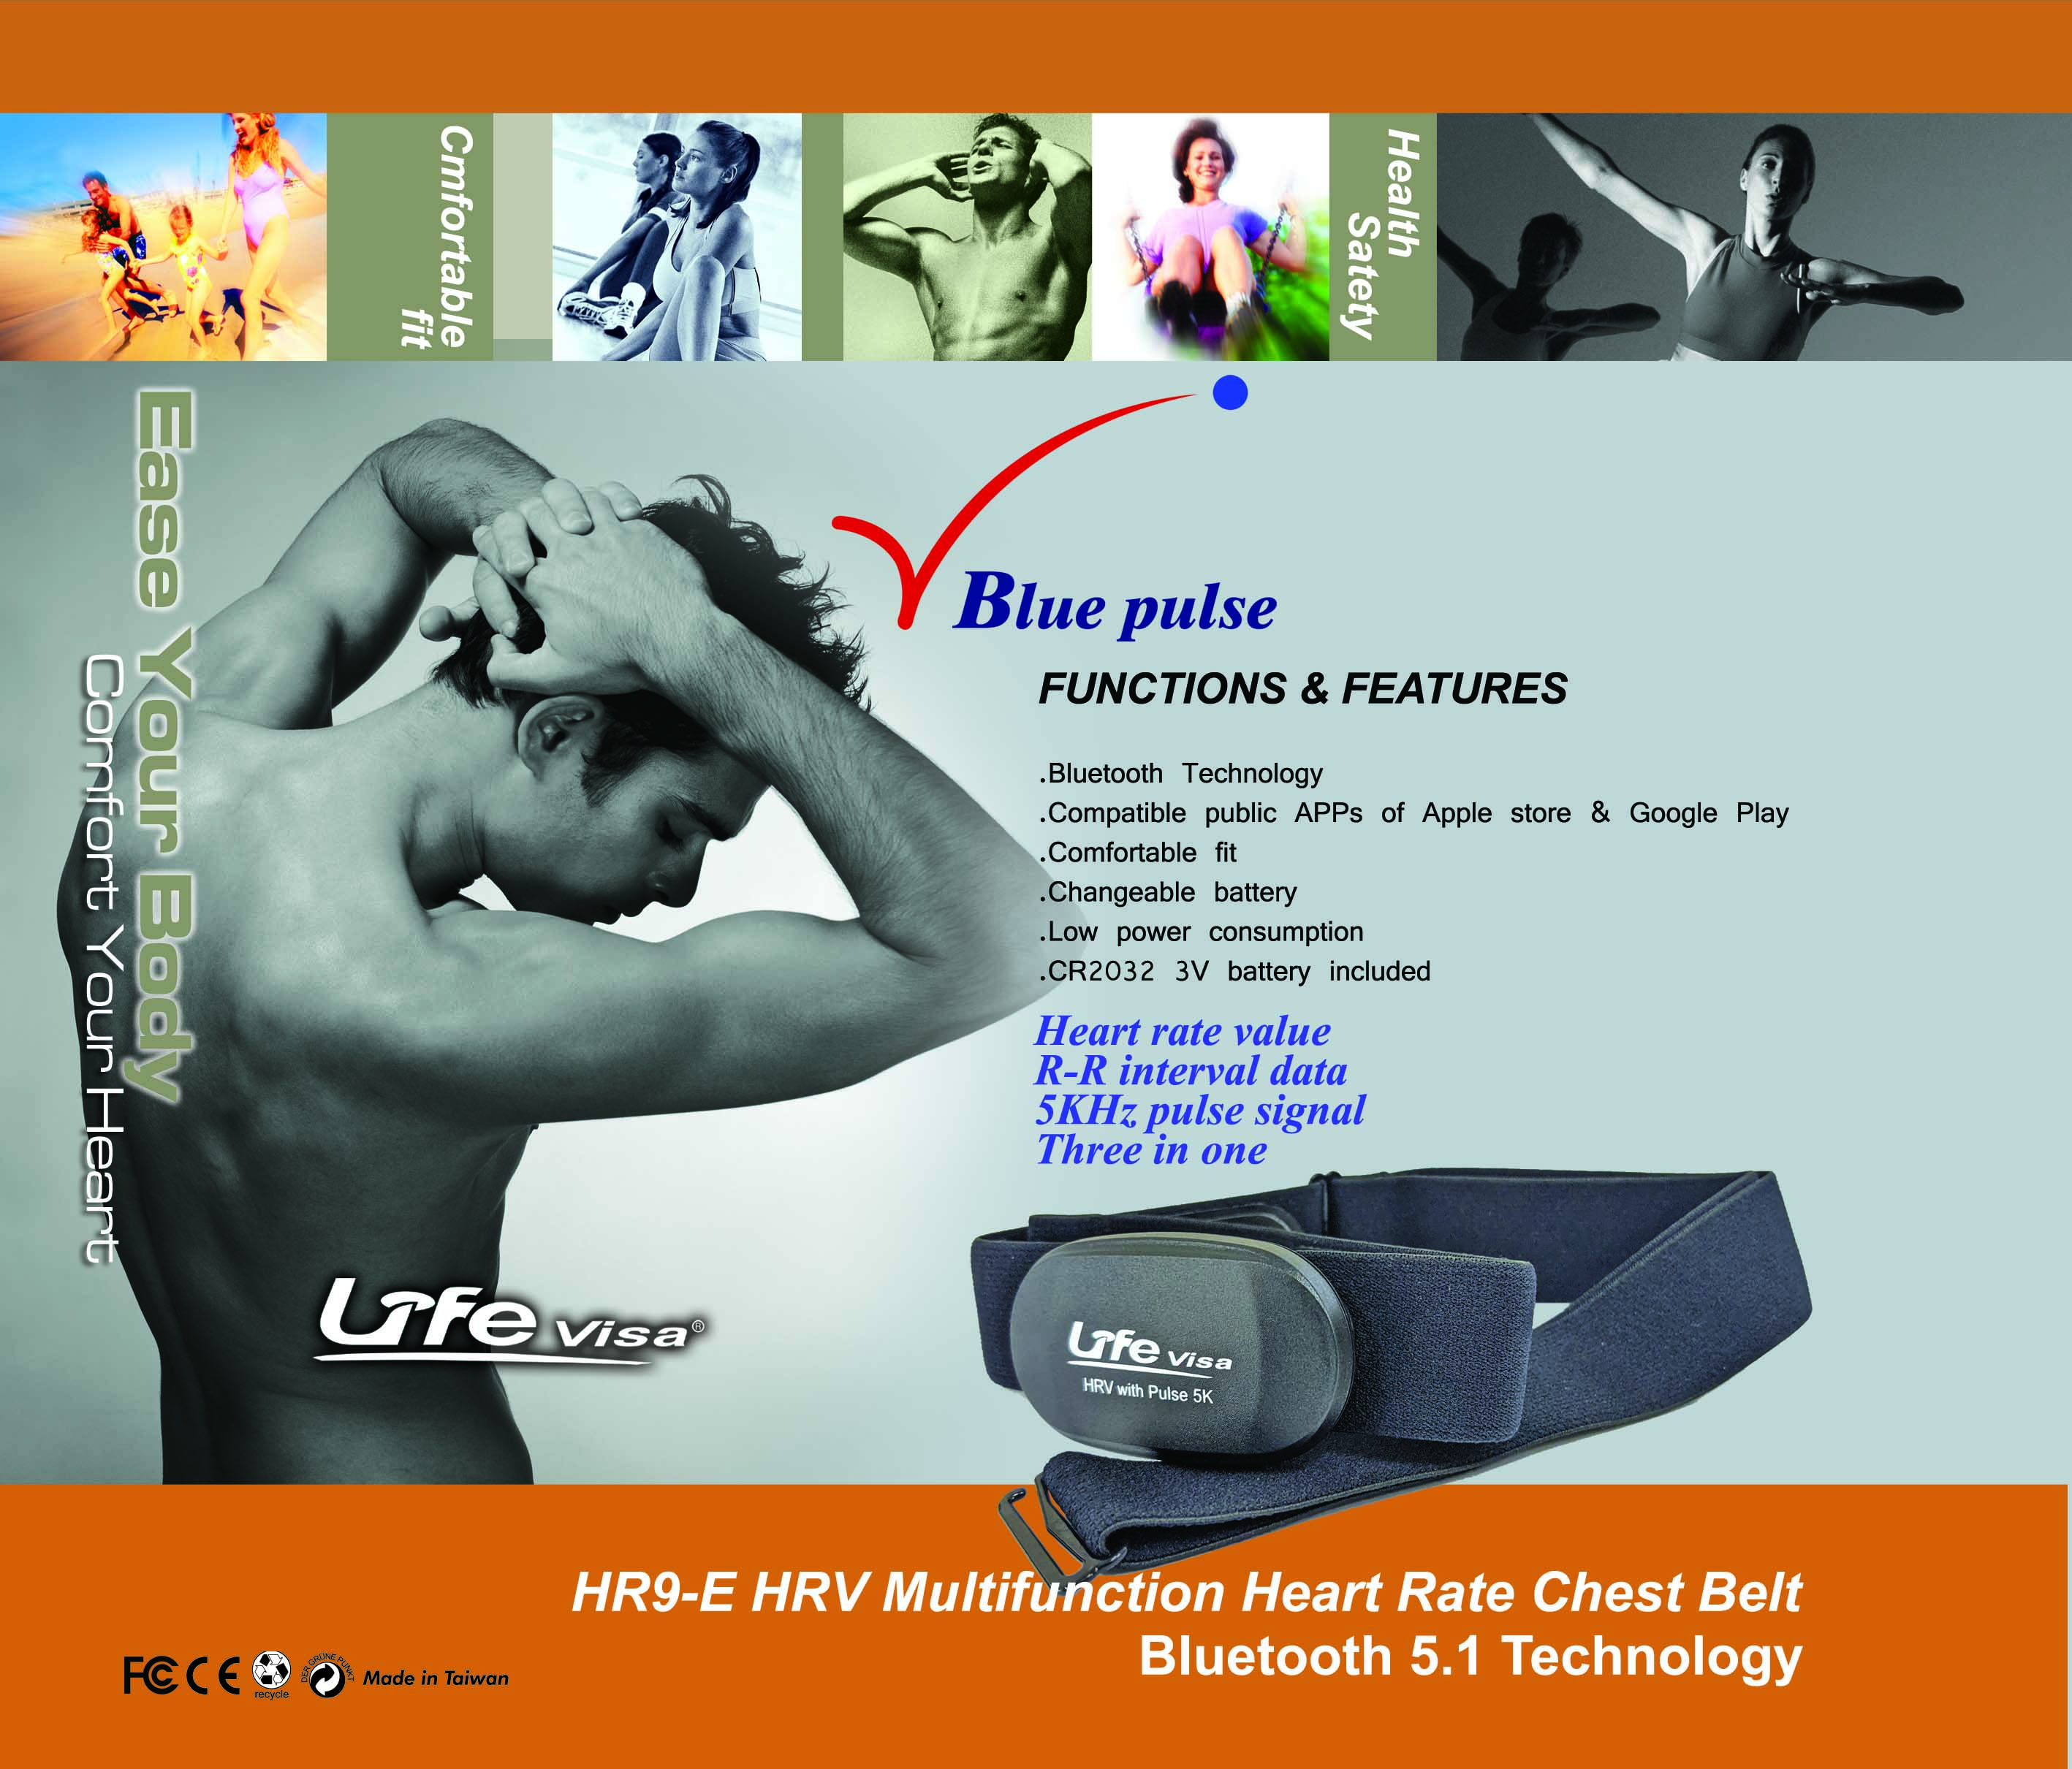 Lifevisa,lifevisa,Taiwan Biotronic,Bluetooth heart rate monitor,Biotronic pulseheart rate monitor,Bluetooth heart rate monitor,One-piece elastic heart rate chest strap,HR9E HRV with Pulse 5.3KHz 2.4GHz(Bluetooth Technology) Digital heart rate One-piece elastic chest strap FCC CE,multi-function heart rate monitor,g.pulse heart rate monitor,G.PULSE 3 in 1,3 in 1 heart rate,three mode heart rate monitor